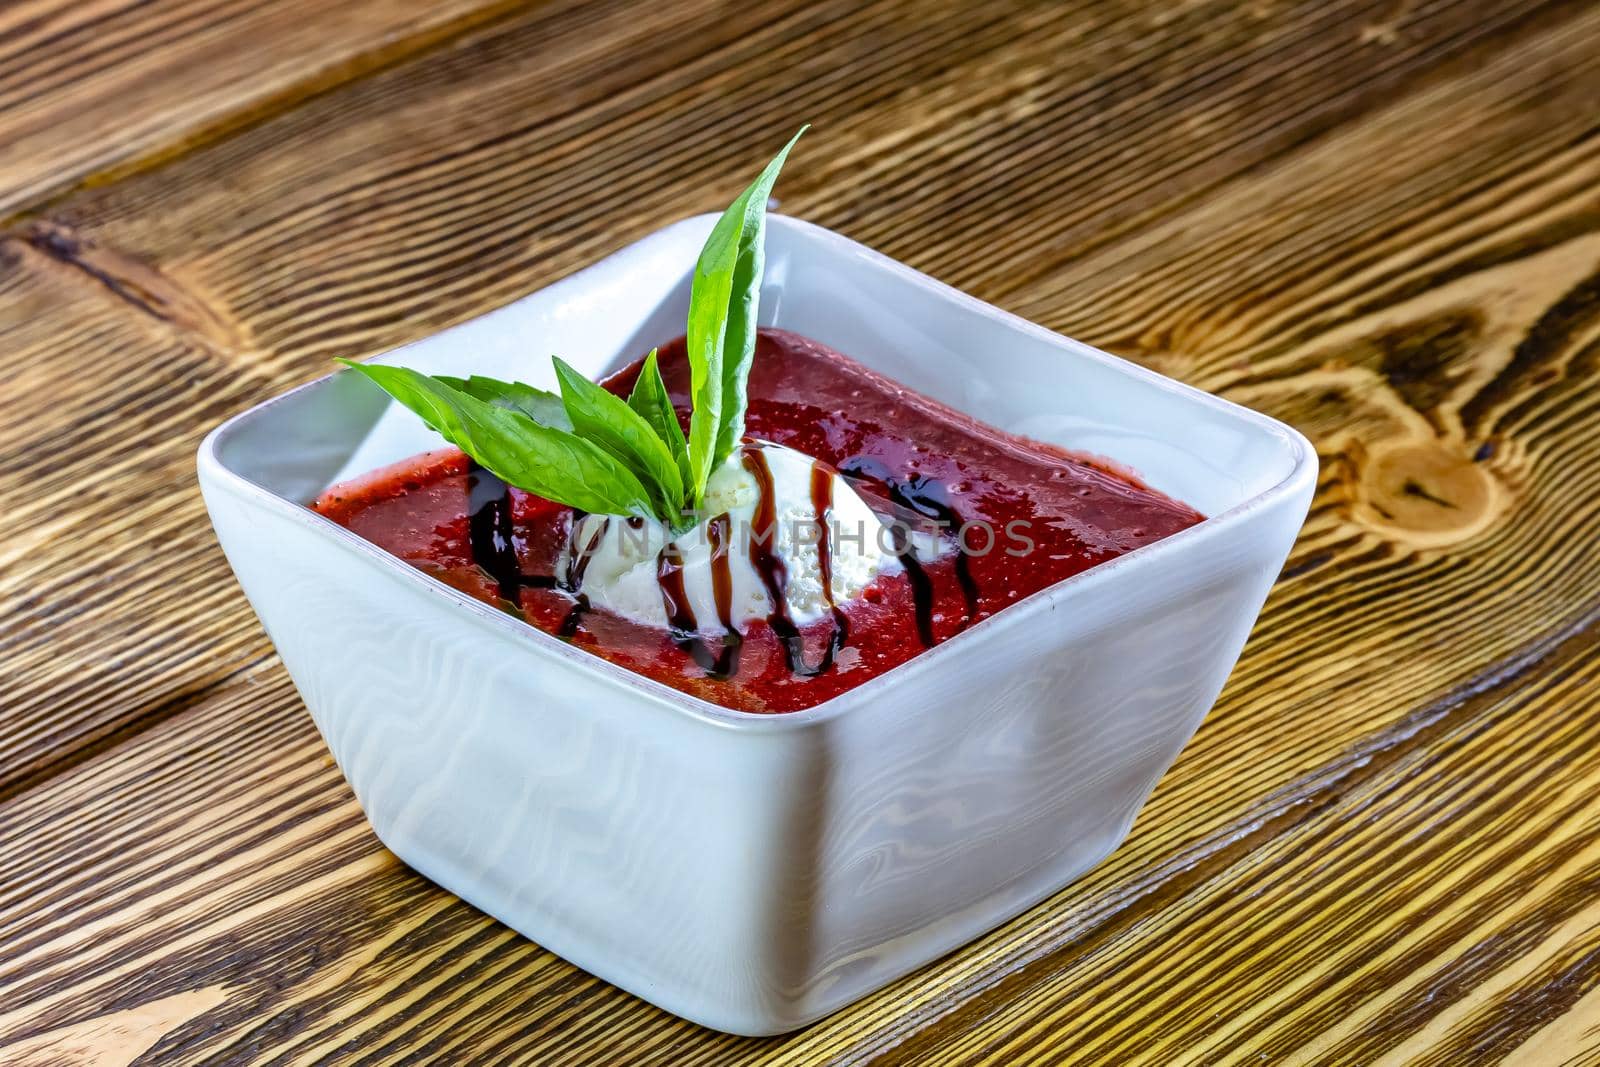 Tasty sweet dessert of ice cream poured with berry sirup in glass ramekin on wooden table. From above. Unfocused background by Milanchikov